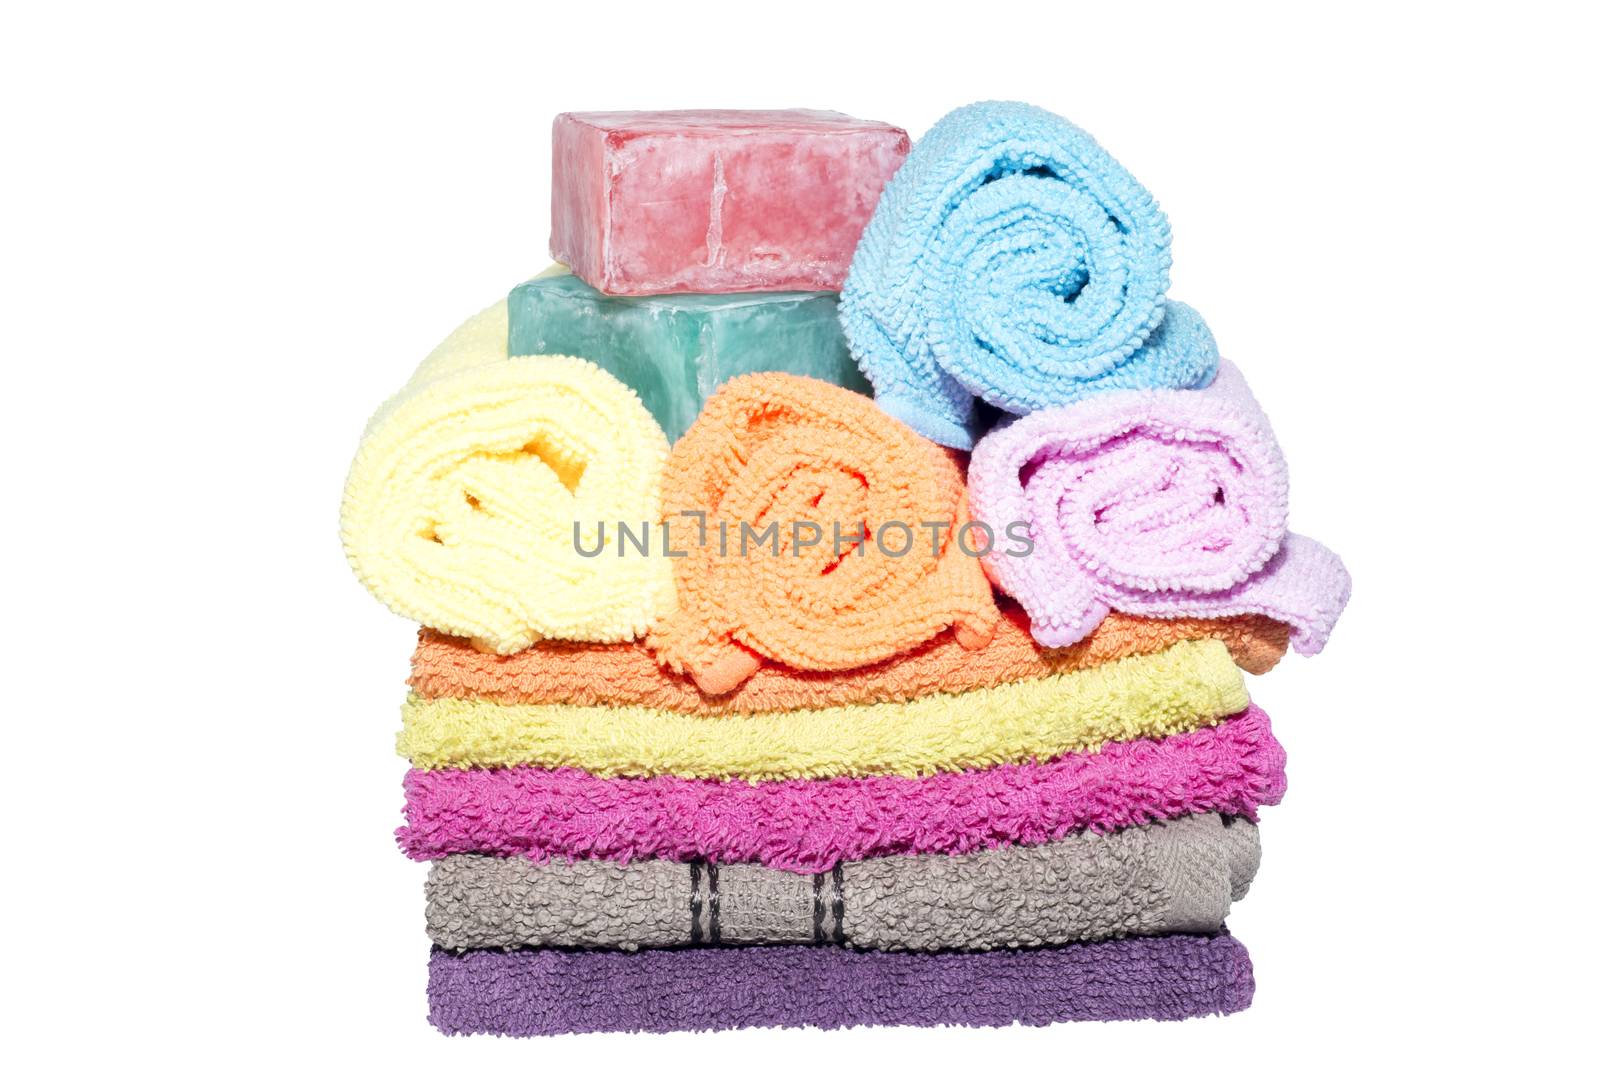 soap bars on facecloths off various shades with some in rolls